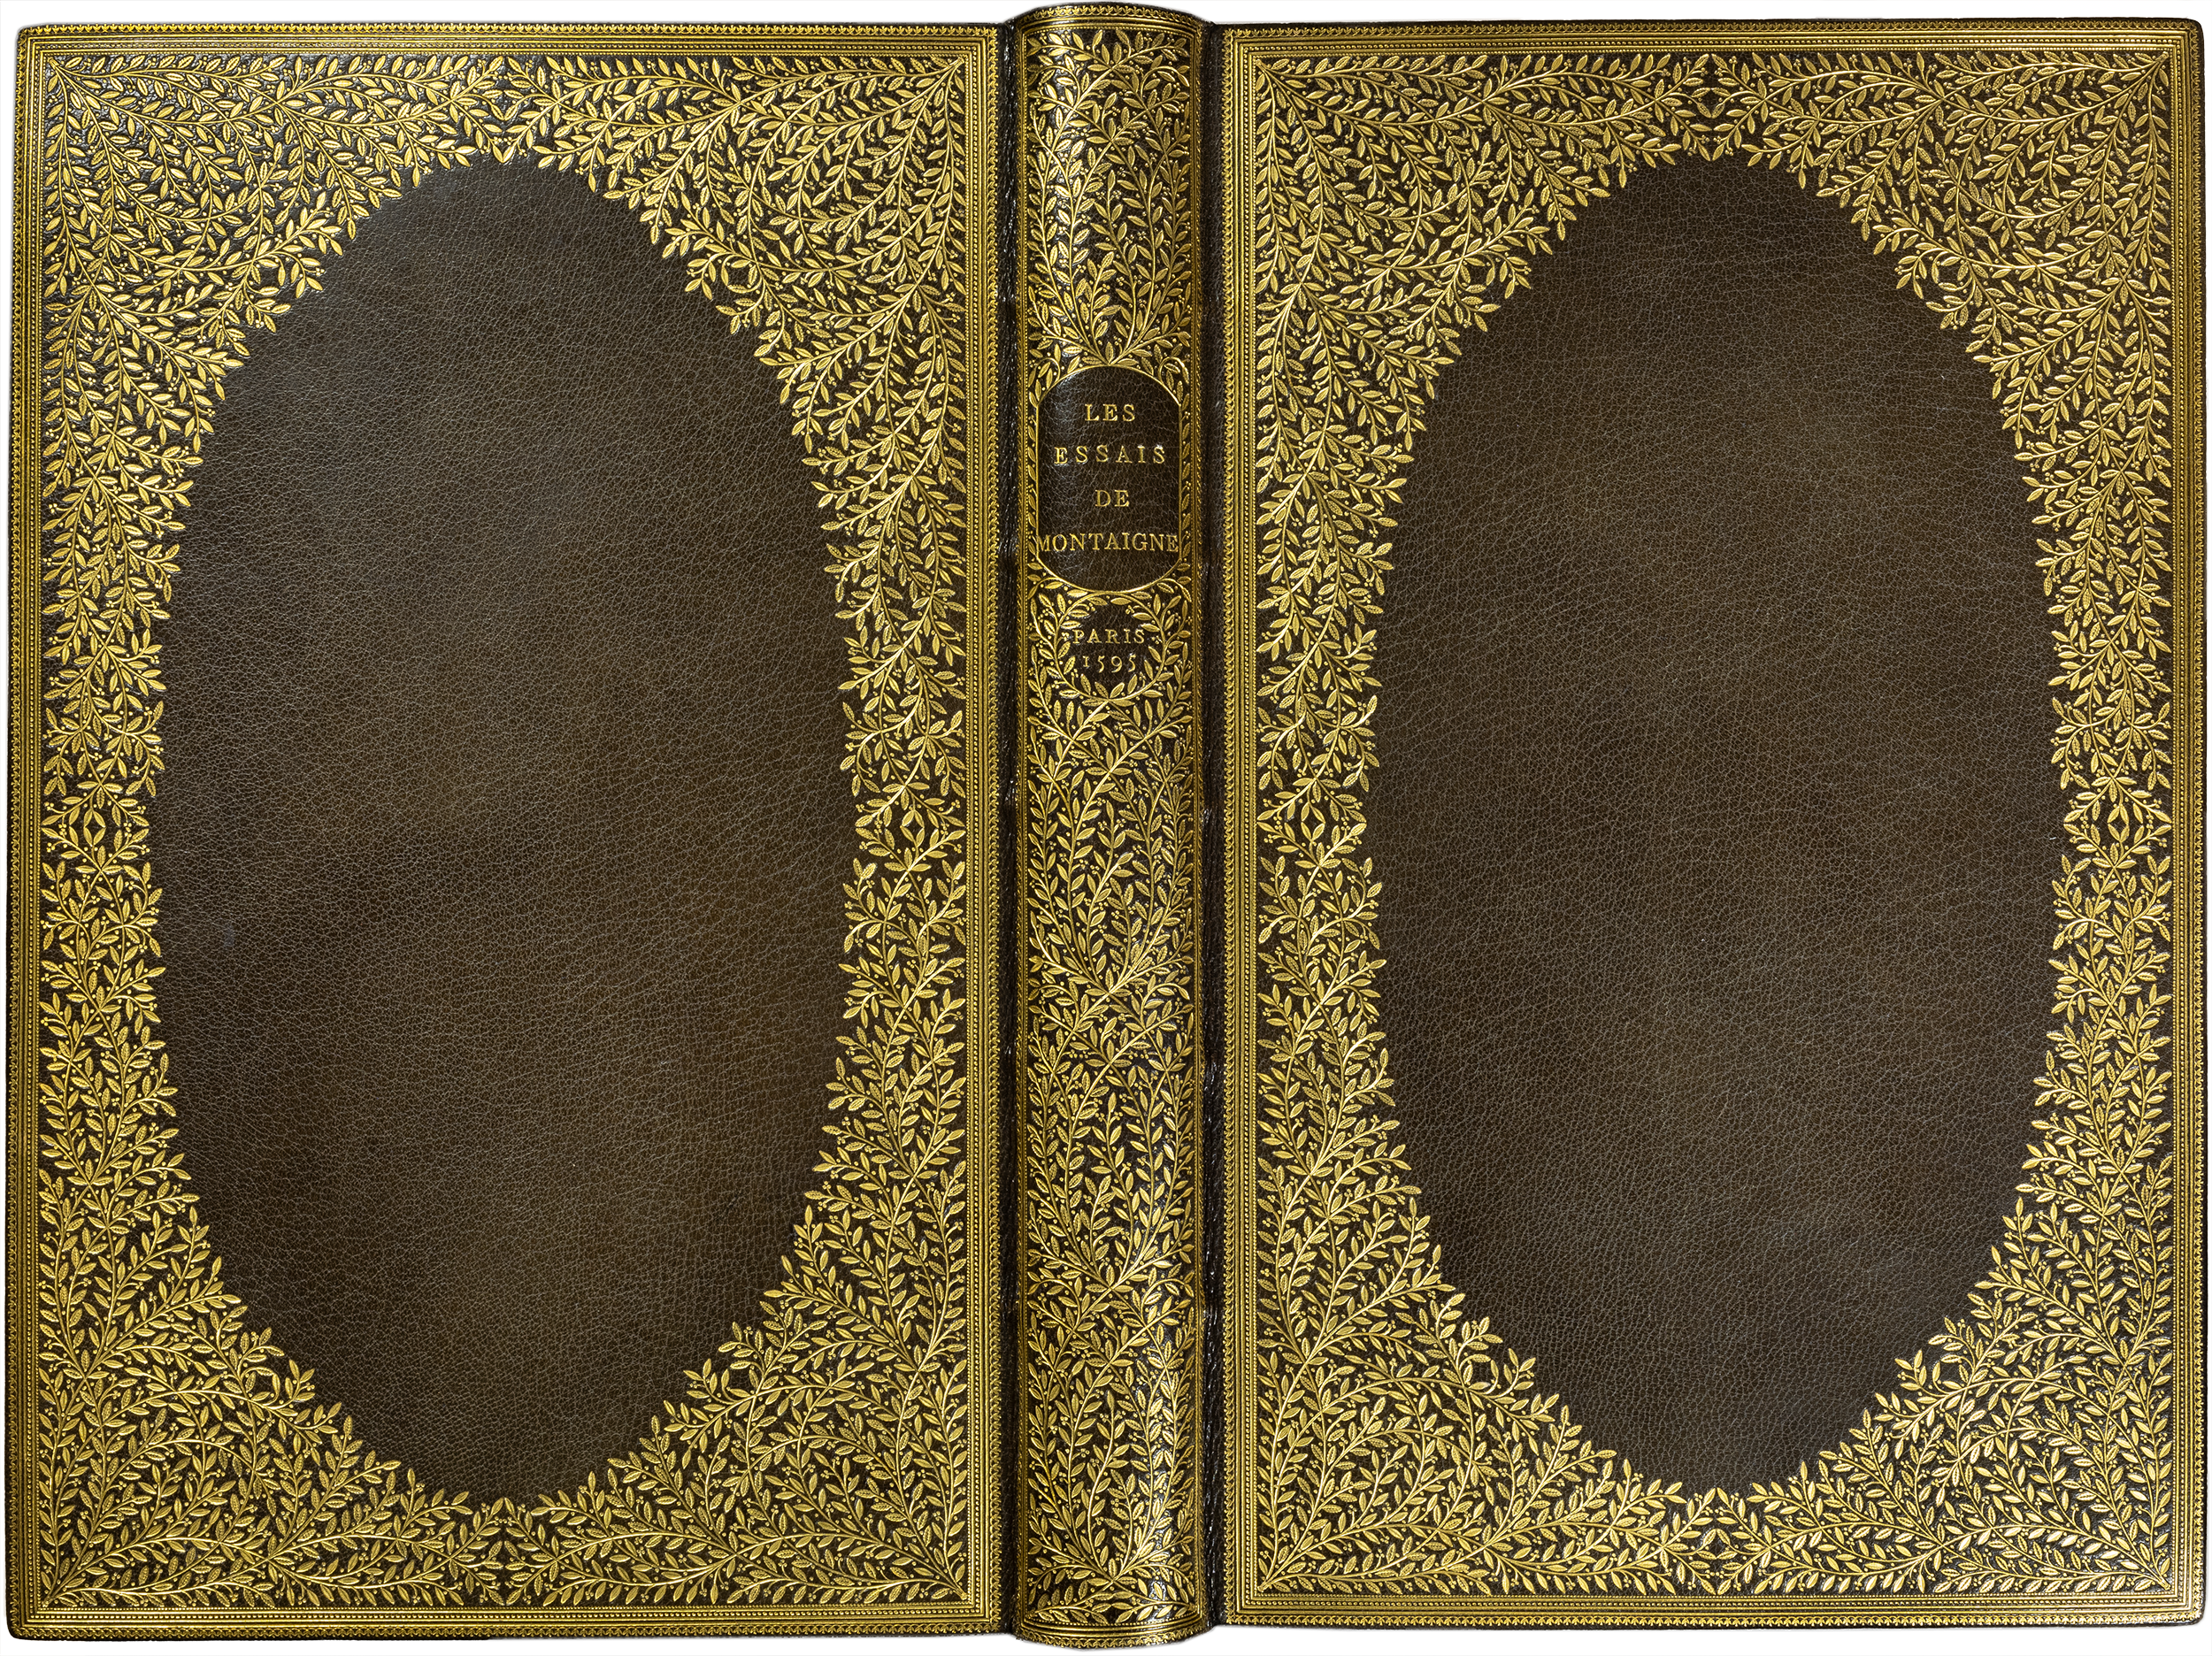 Montaigne-essais-1595-lortic-binding-reliure-olive-morocco-gilt.png